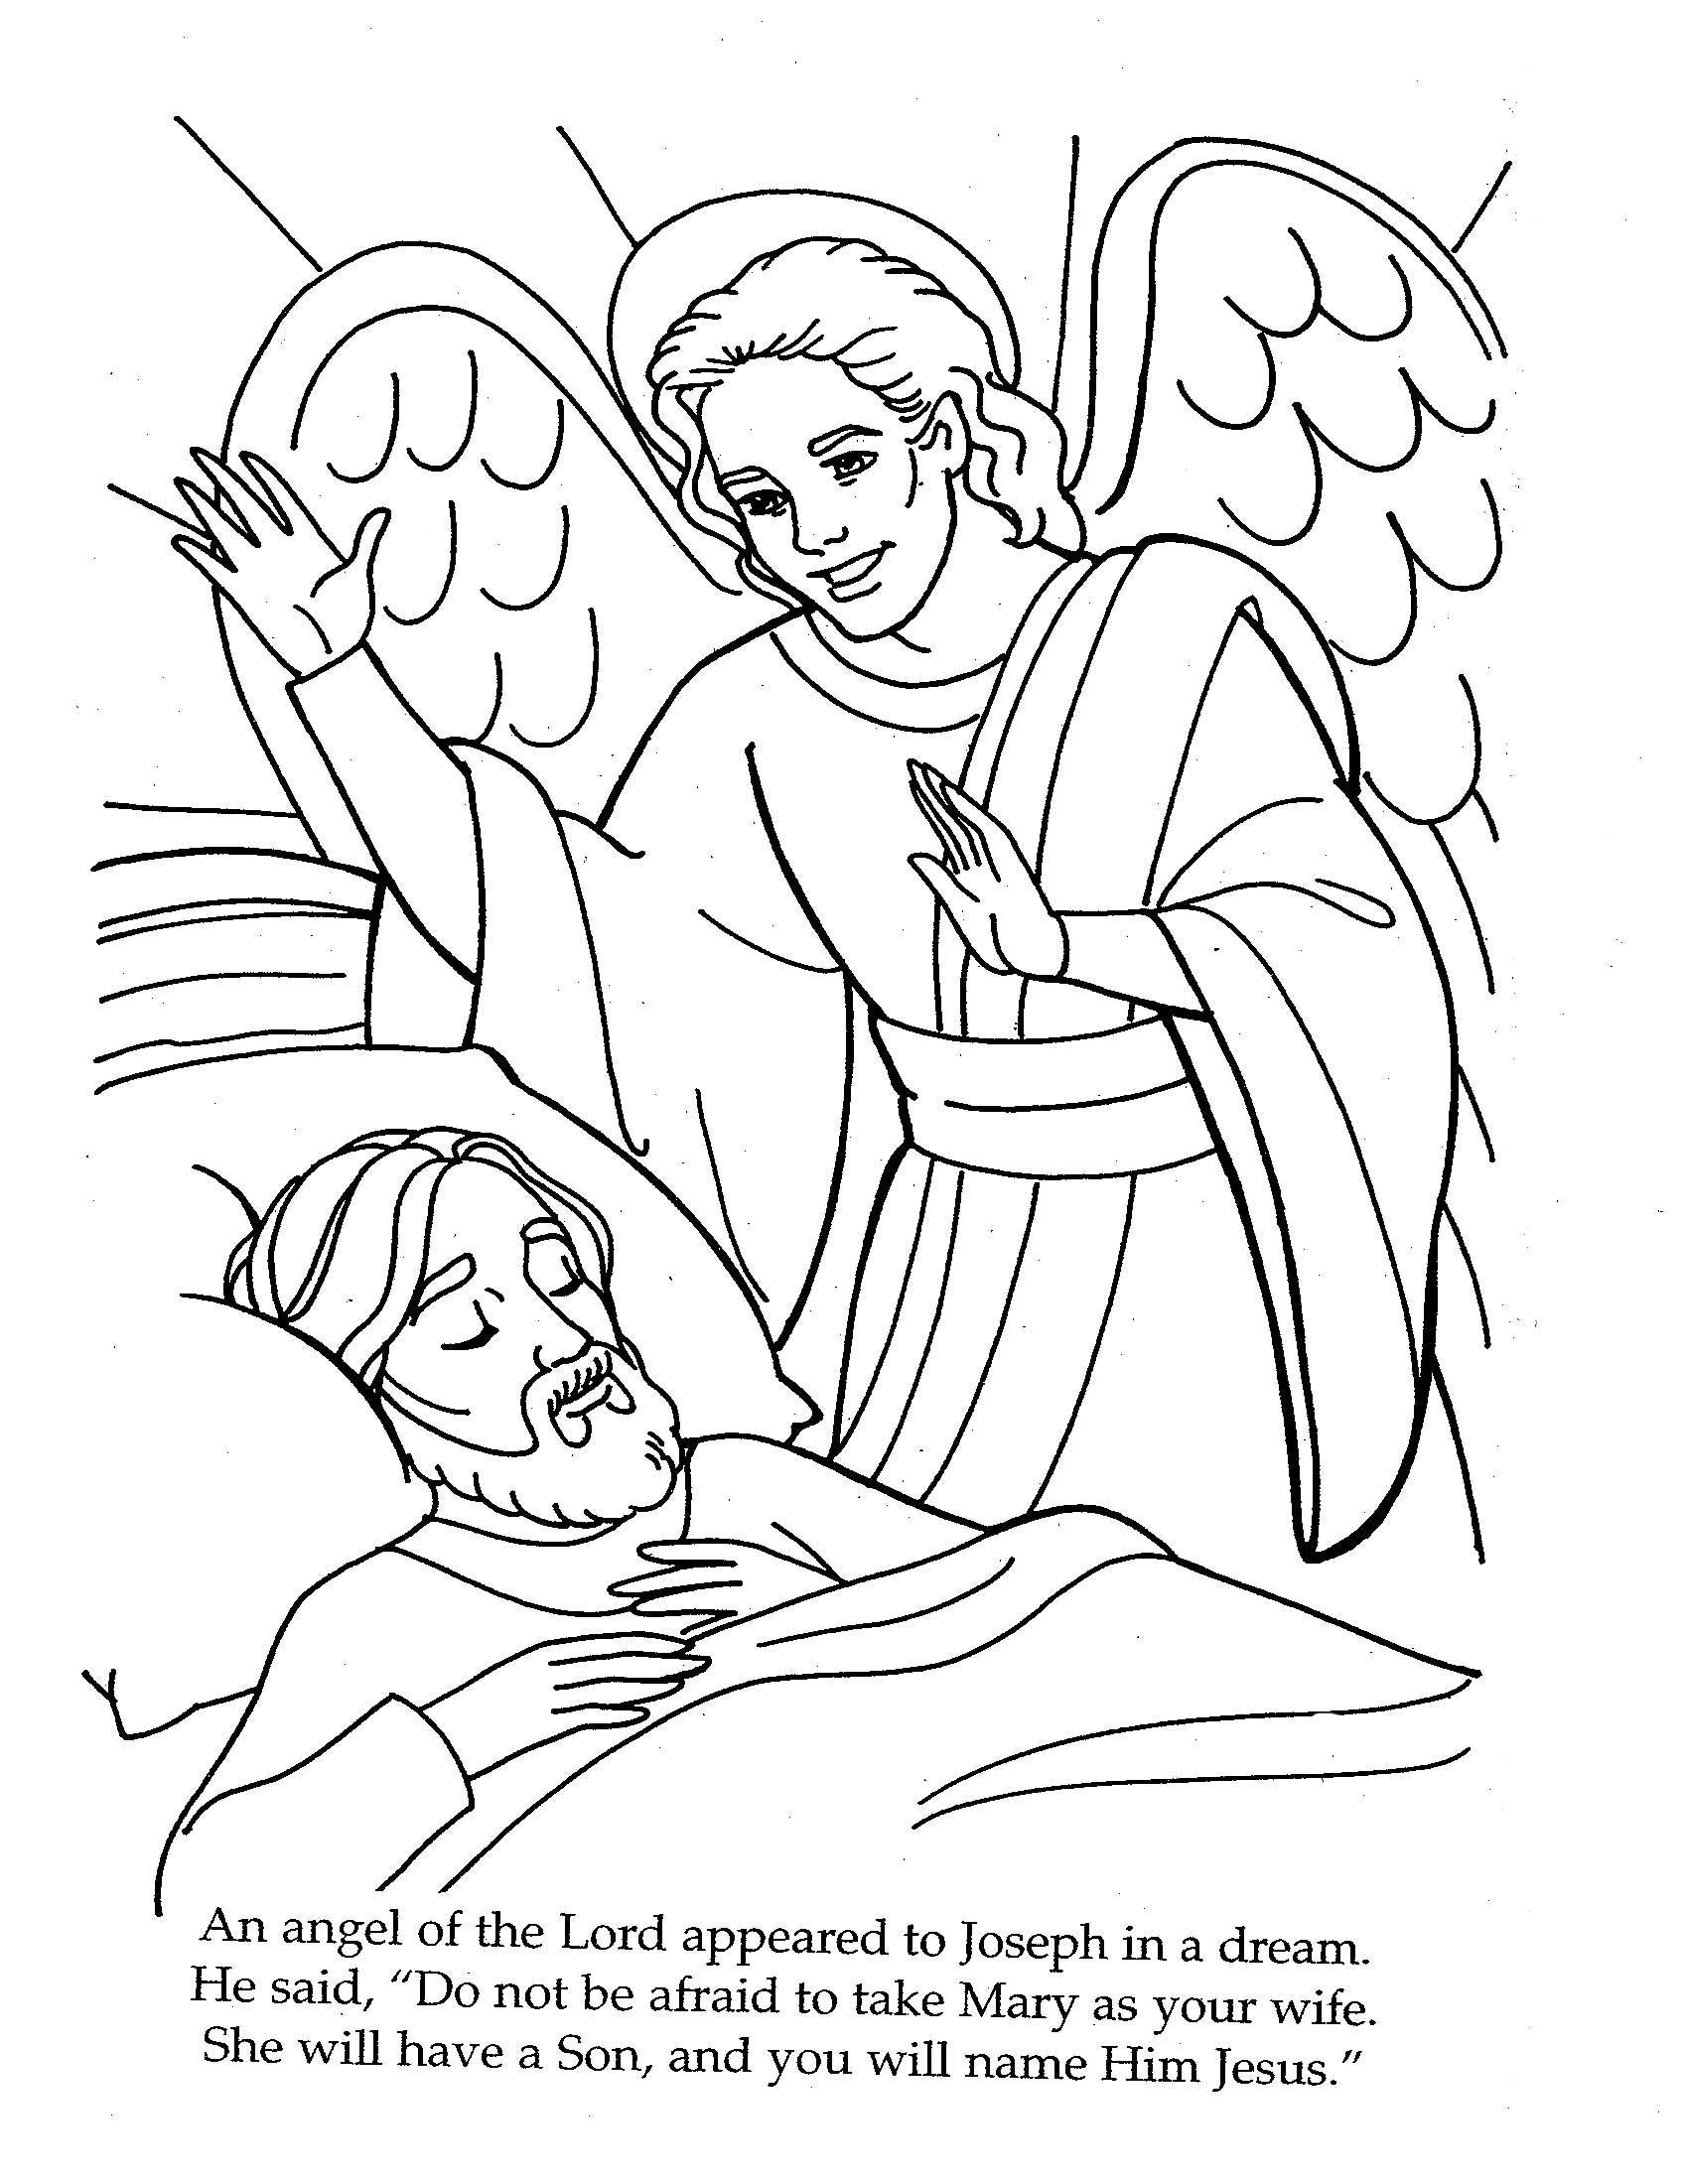 Angel Visits Joseph Coloring Page Gabriel Visits Zechariah Coloring Page Lovely Image Result For